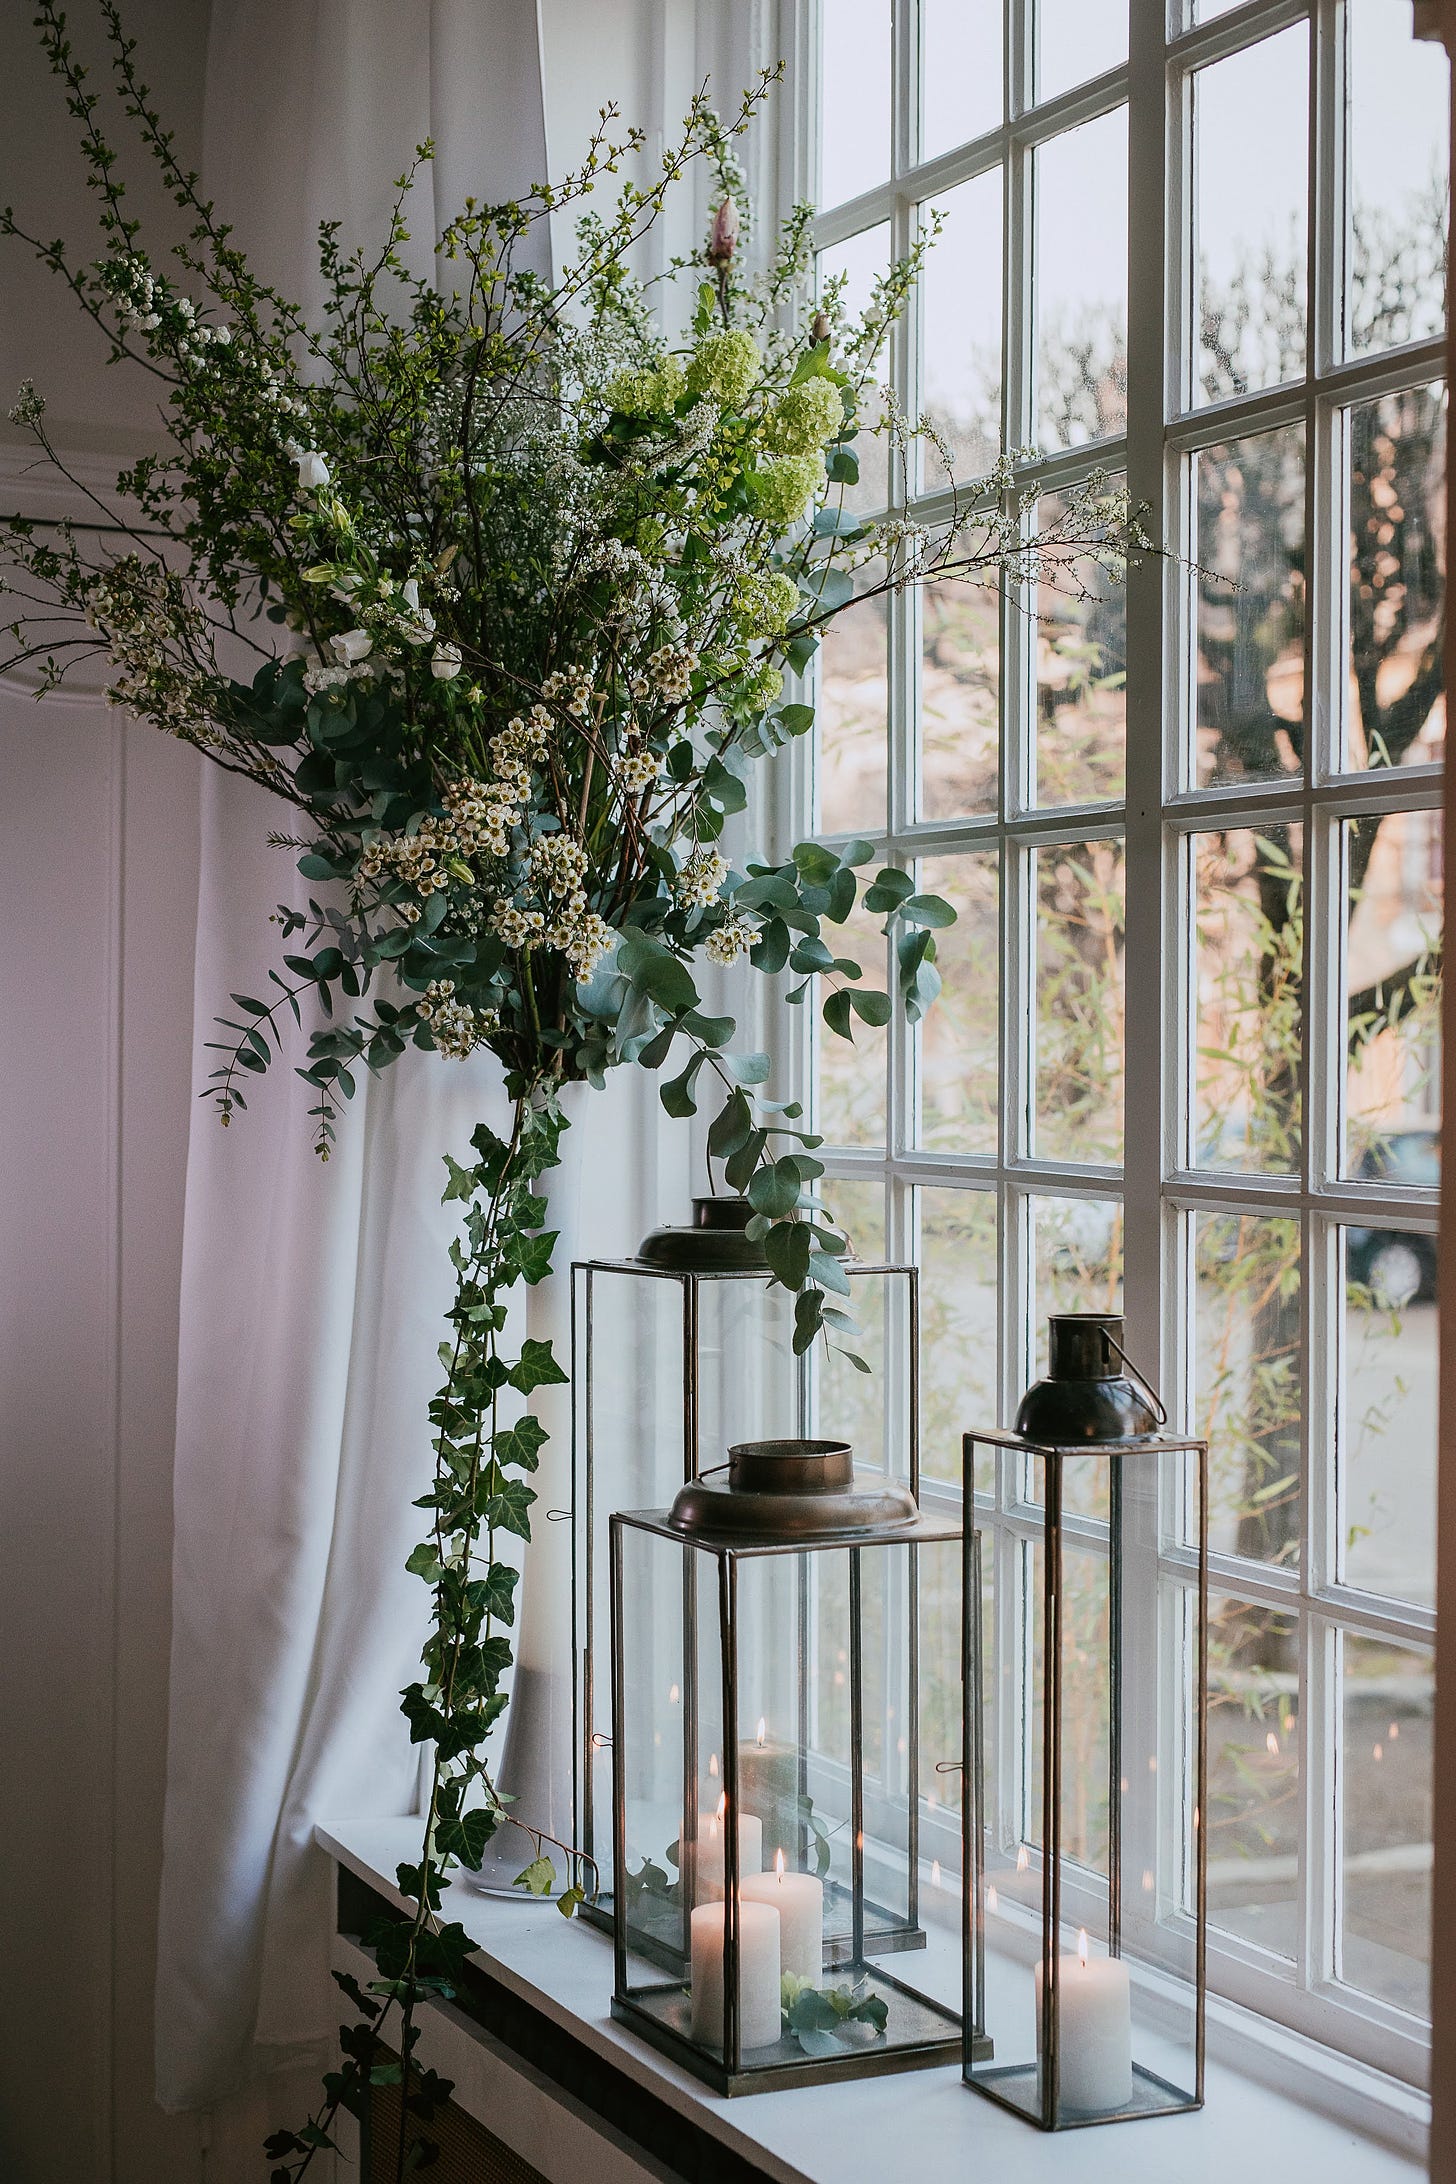 Branches, blossoms and candle lanterns decorate a window at a wedding